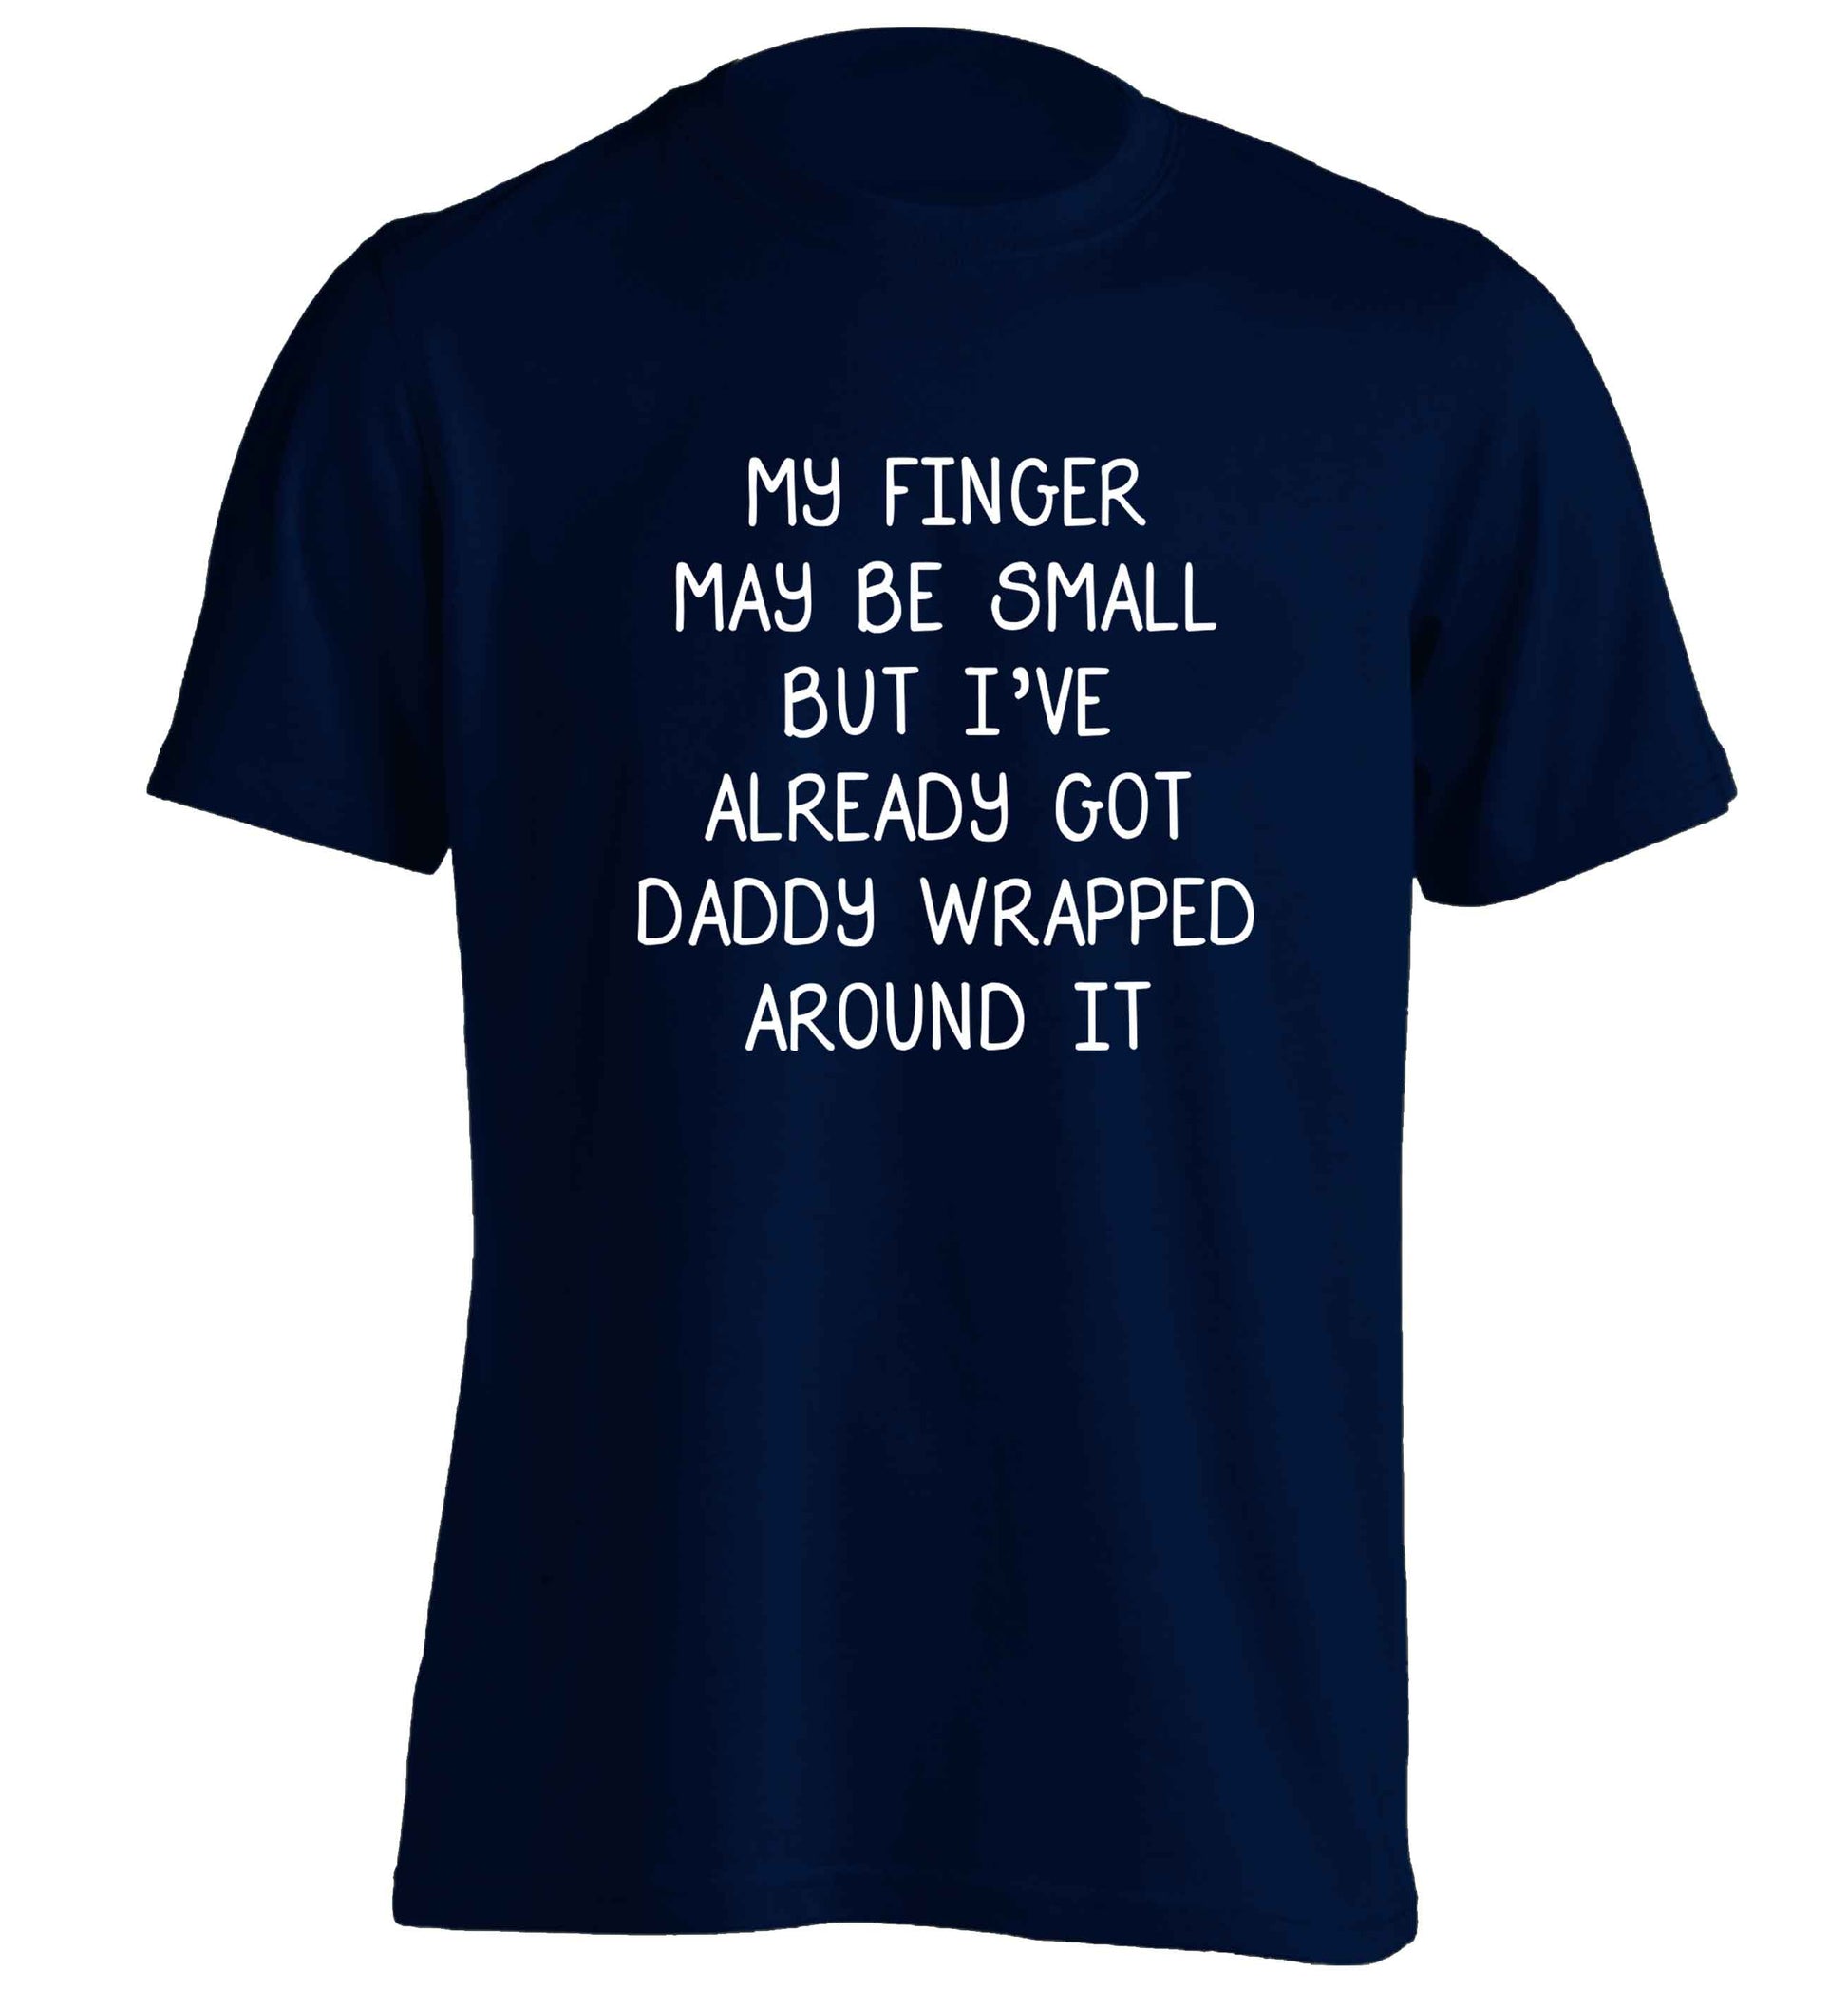 My finger may be small but I've already got daddy wrapped around it adults unisex navy Tshirt 2XL